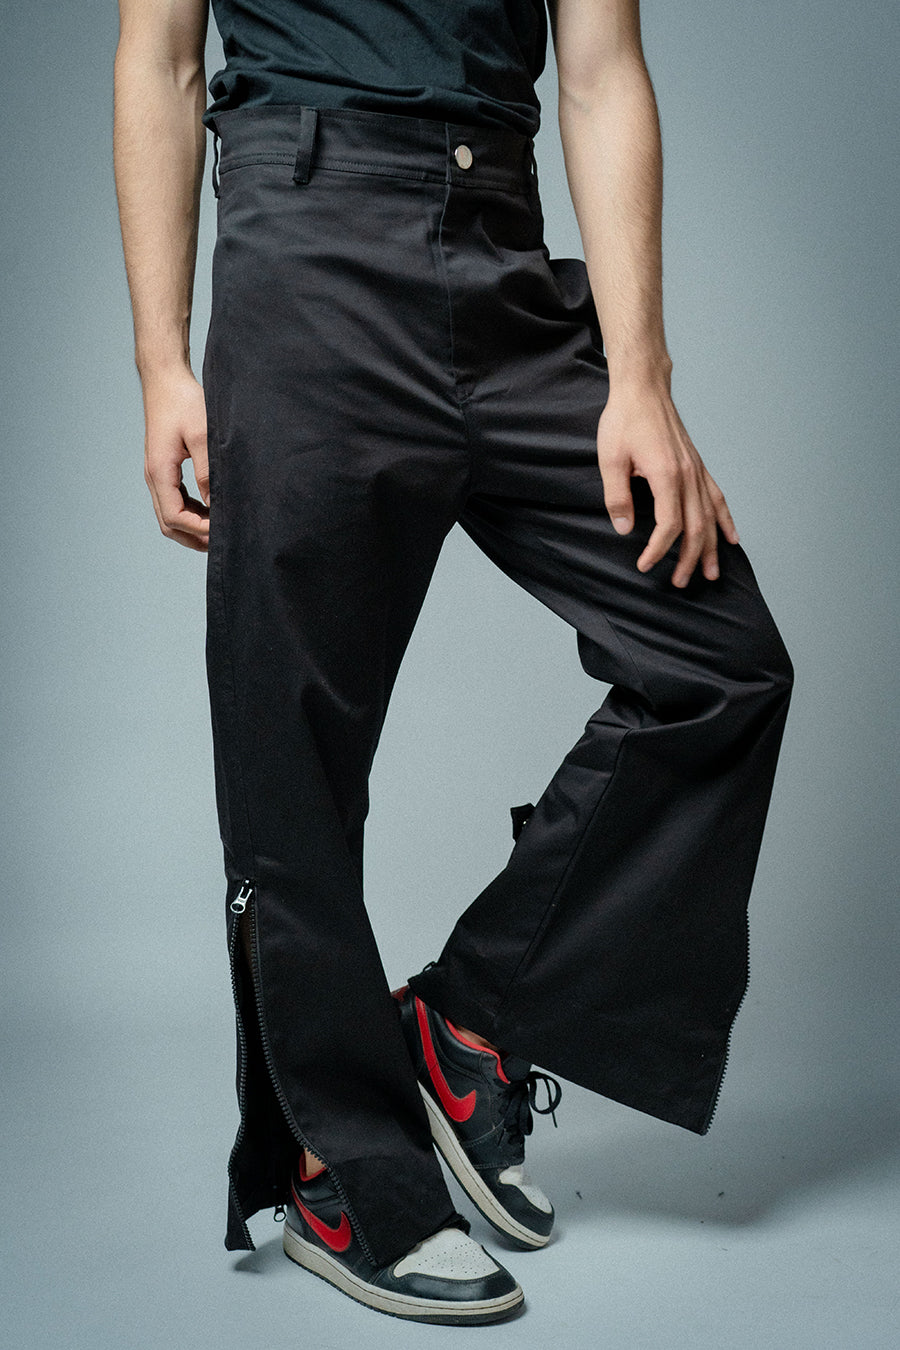 The epitome of urban chic and streetwear cool. With utility zips, leg-revealing zips, and back-flaring zips, these pants offer six reasons to love them, available at Cop Underdog In-store and ready to ship.